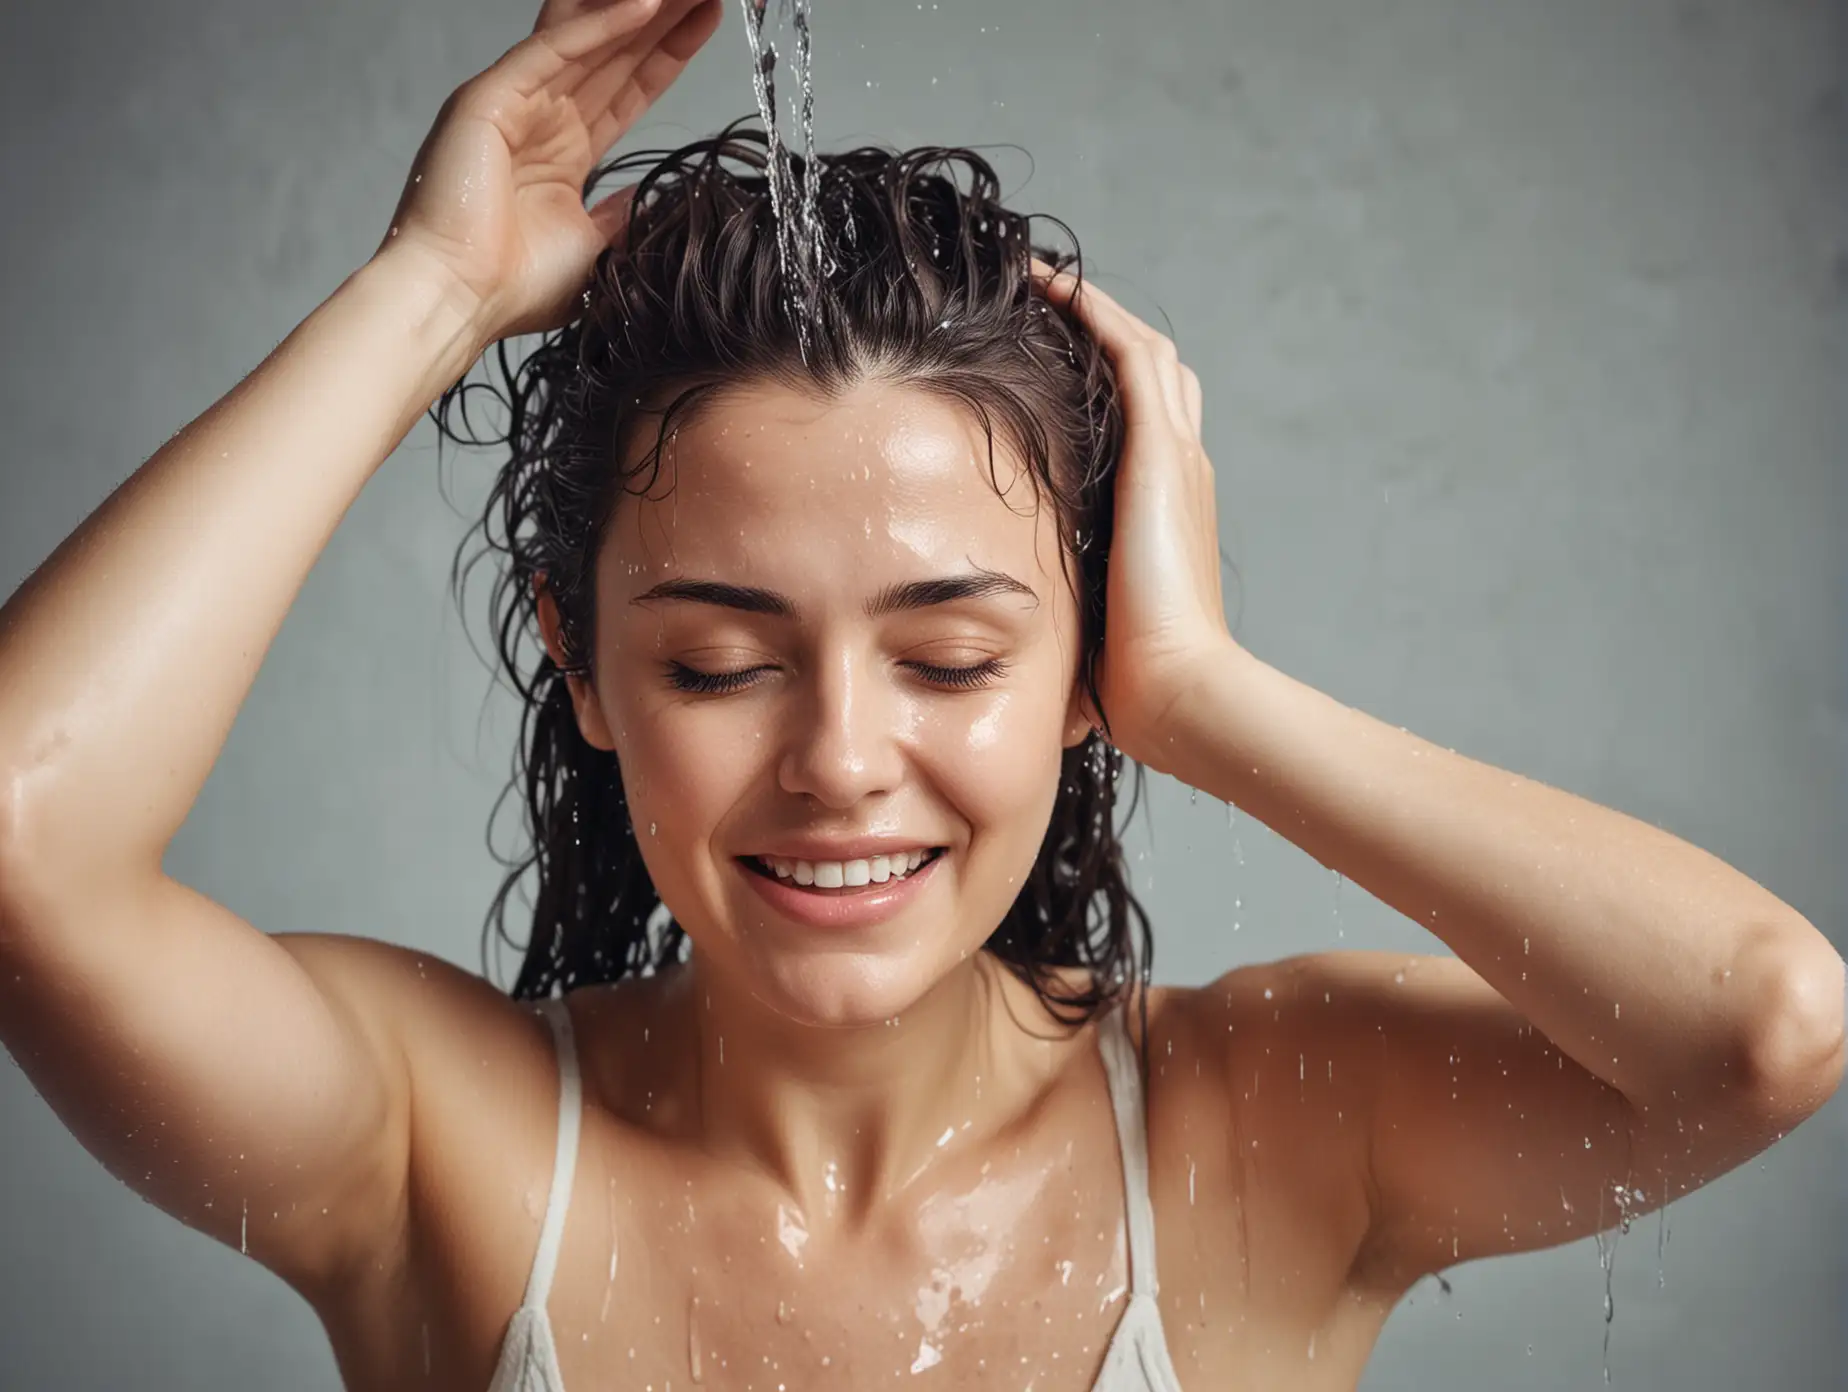 Woman-Pouring-Water-on-Her-Own-Head-Dripping-Wet-Hair